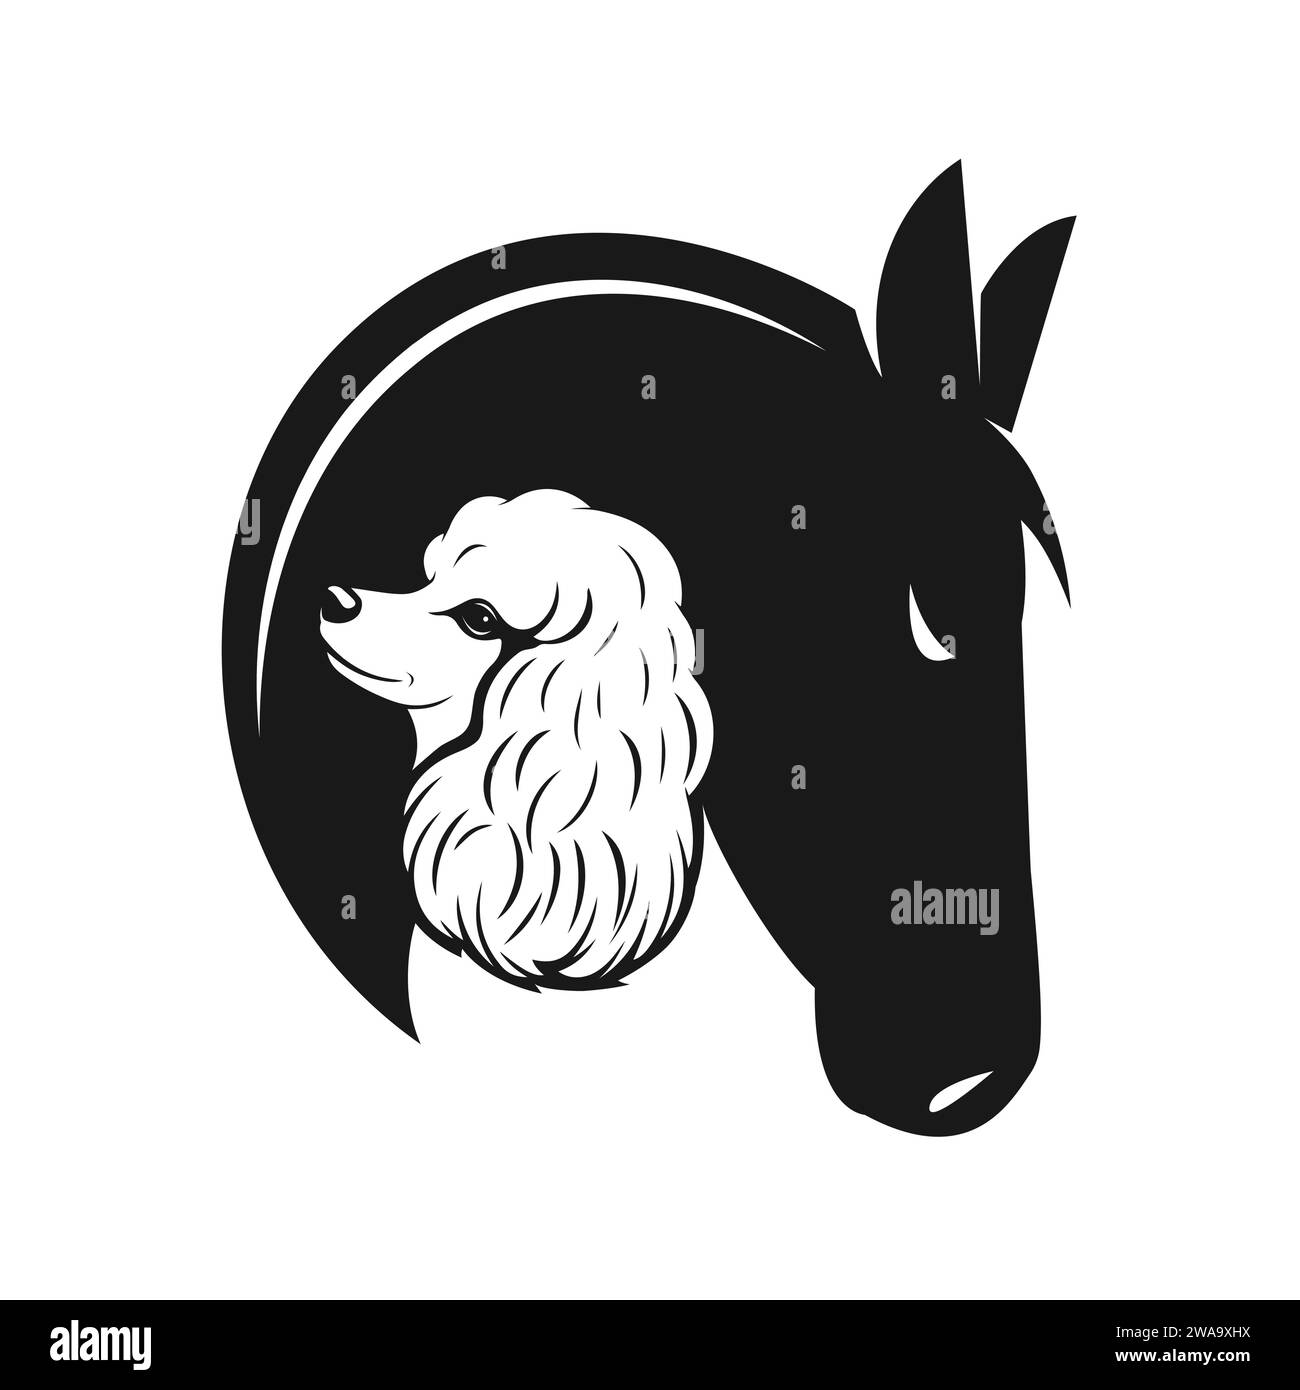 Horse head and Poodle dog design on white background. Animals. Pet. Easy editable layered vector illustration. Stock Vector